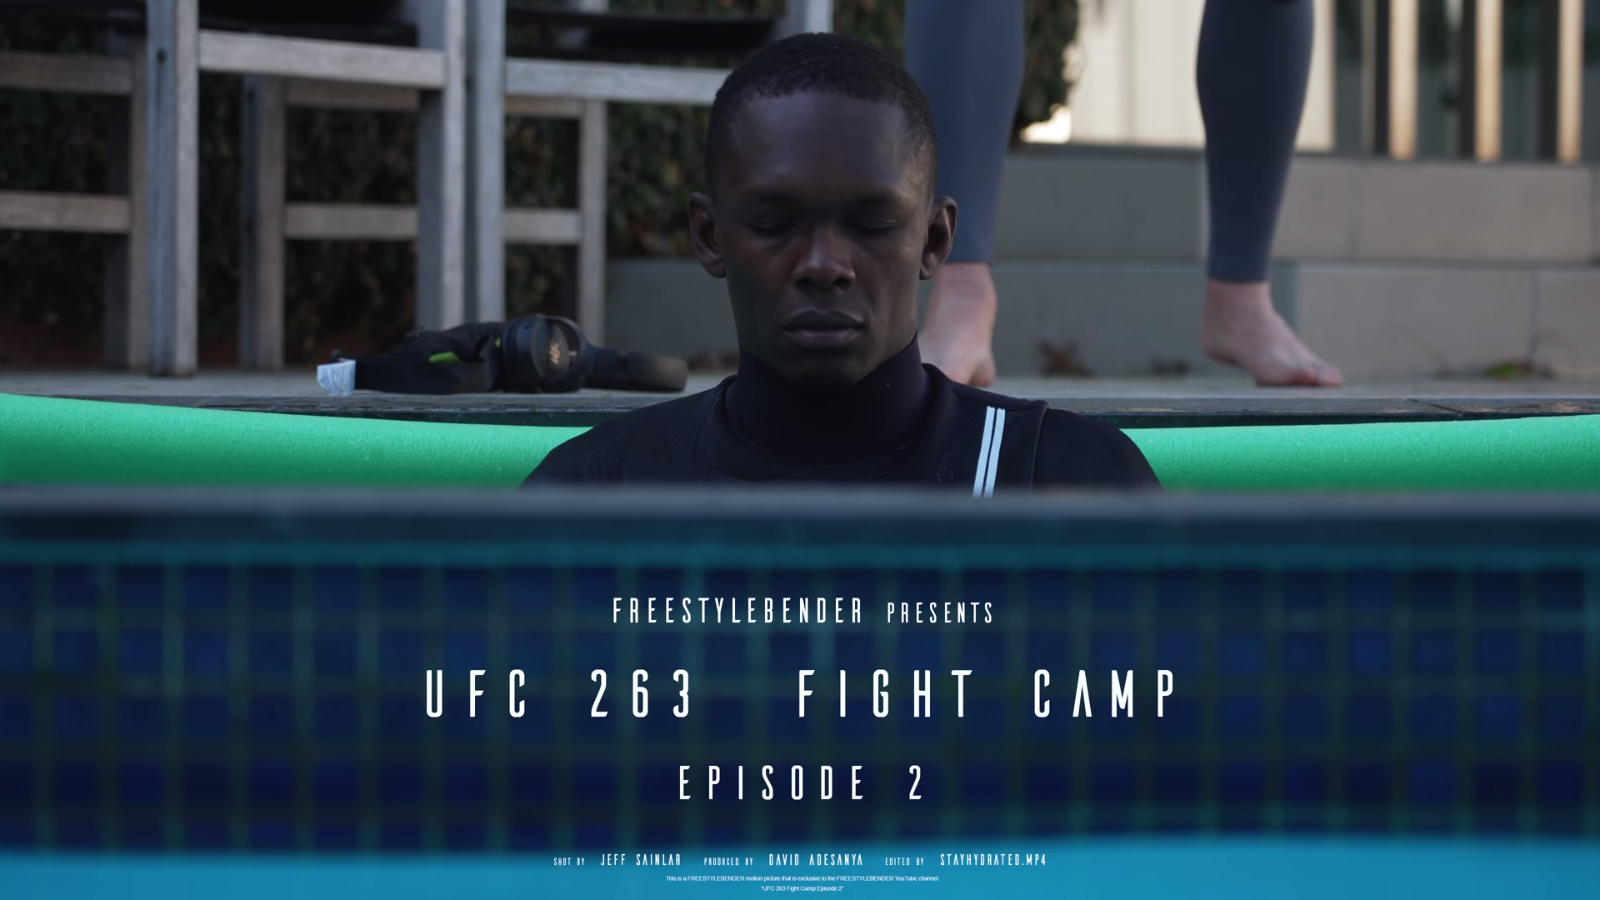 Video: In the assist of the scenes of Israel Adesanya’s UFC 263 battle camp — Episode 2